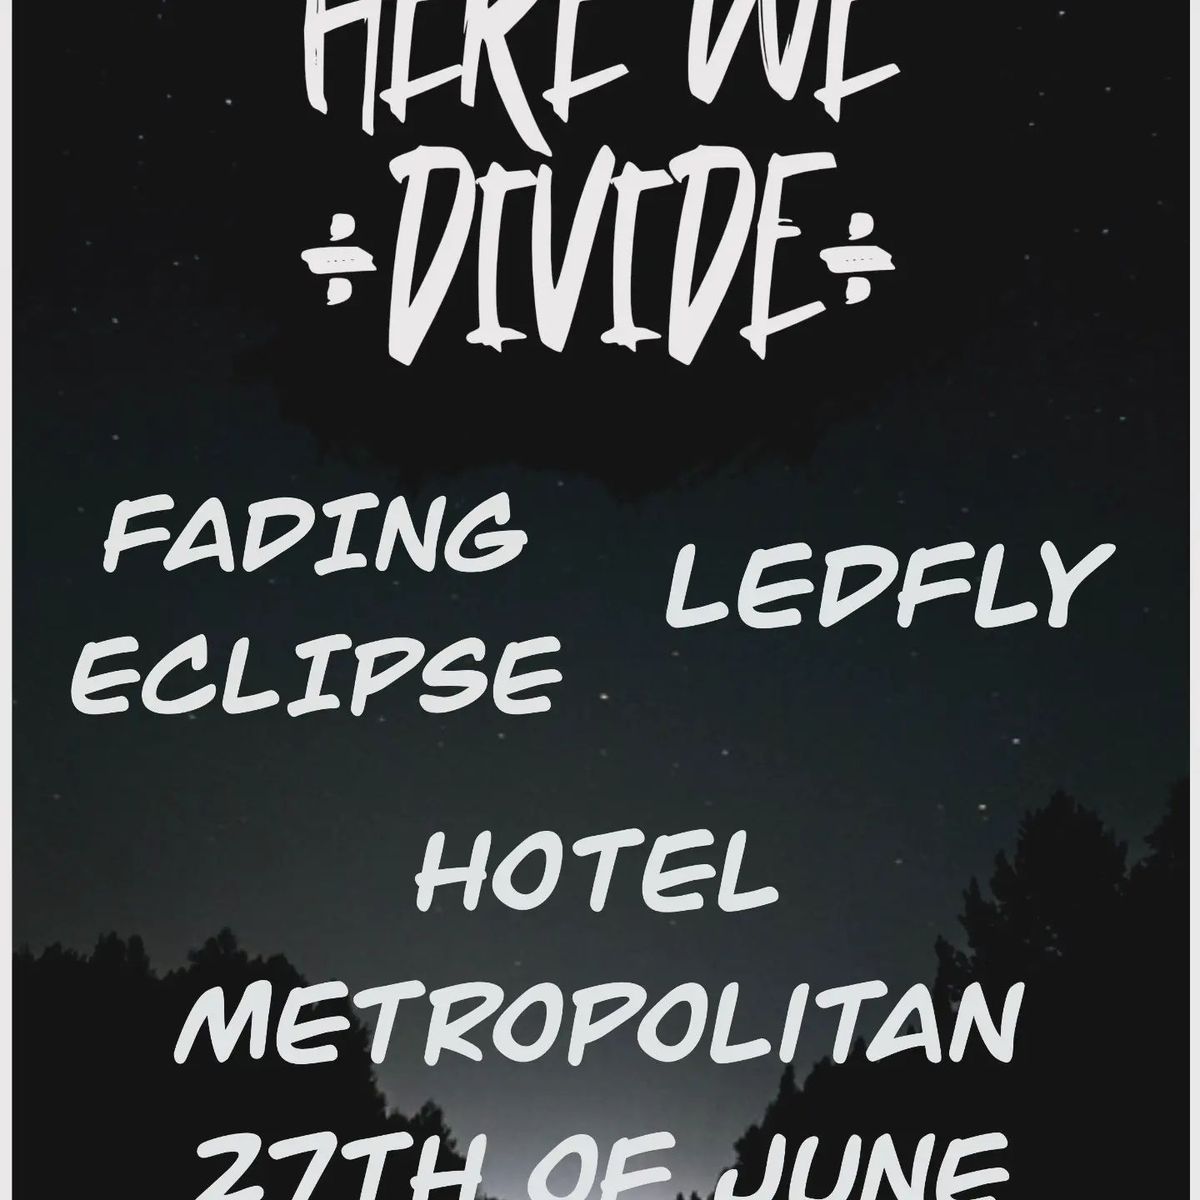 HERE WE DIVIDE - LIVE AT THE METRO HOTEL !!! WITH SPECIAL GUESTS 